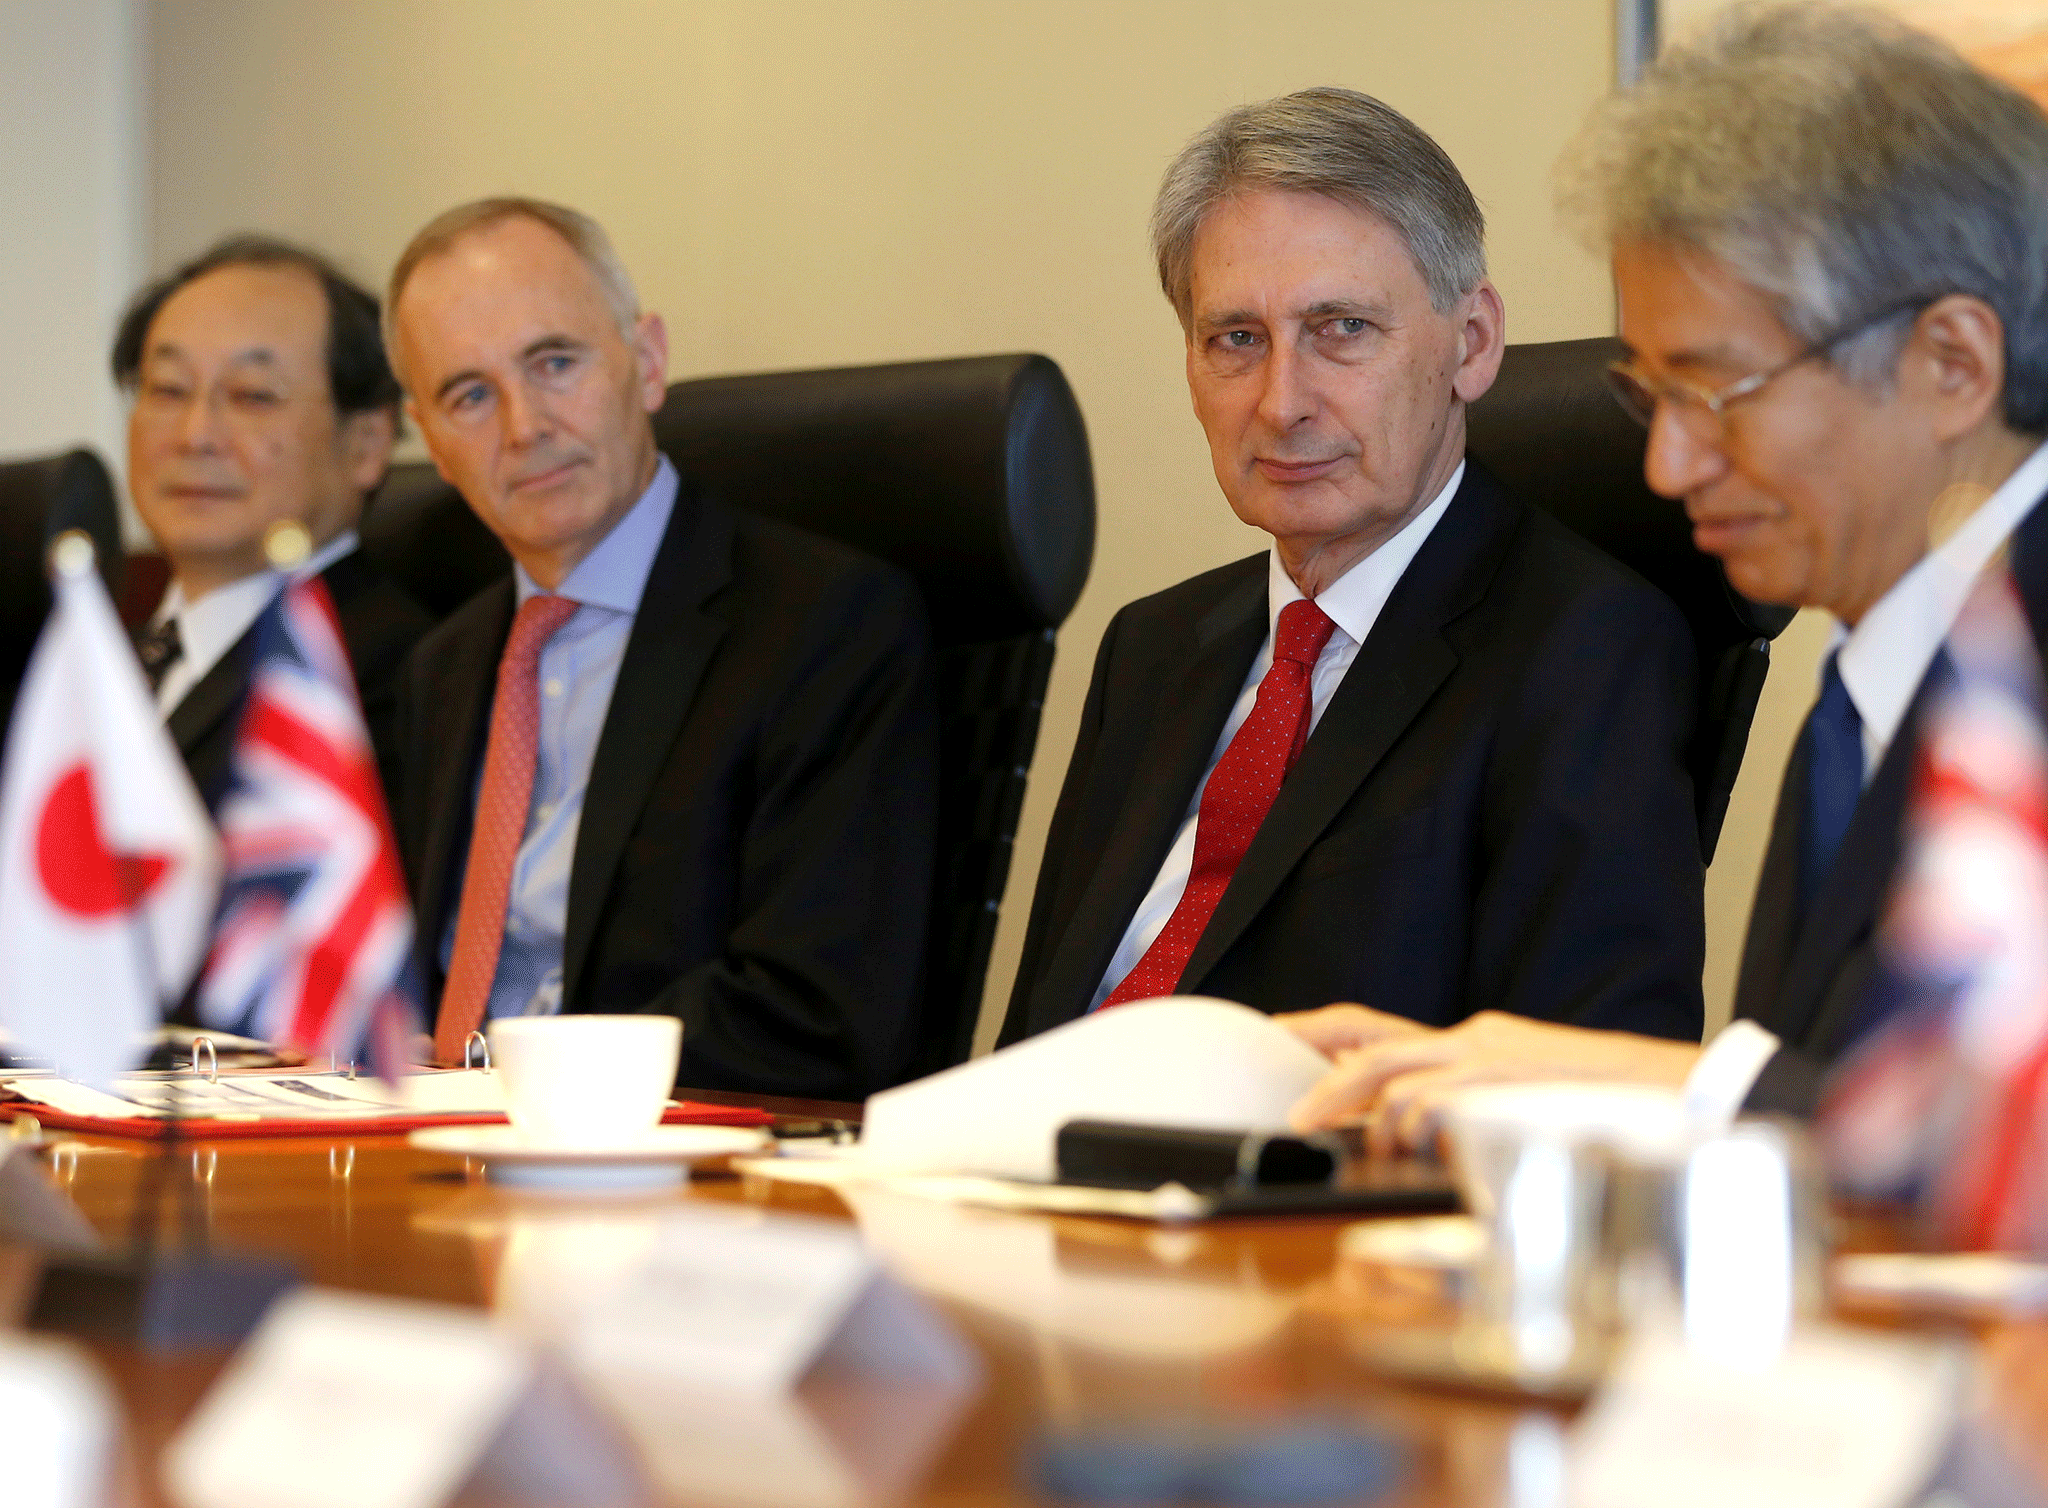 Chancellor Philip Hammond, flanked by British Ambassador to Japan Tim Hitchens, attends a meeting with CEOs and board members of Japanese financial institutions in Tokyo